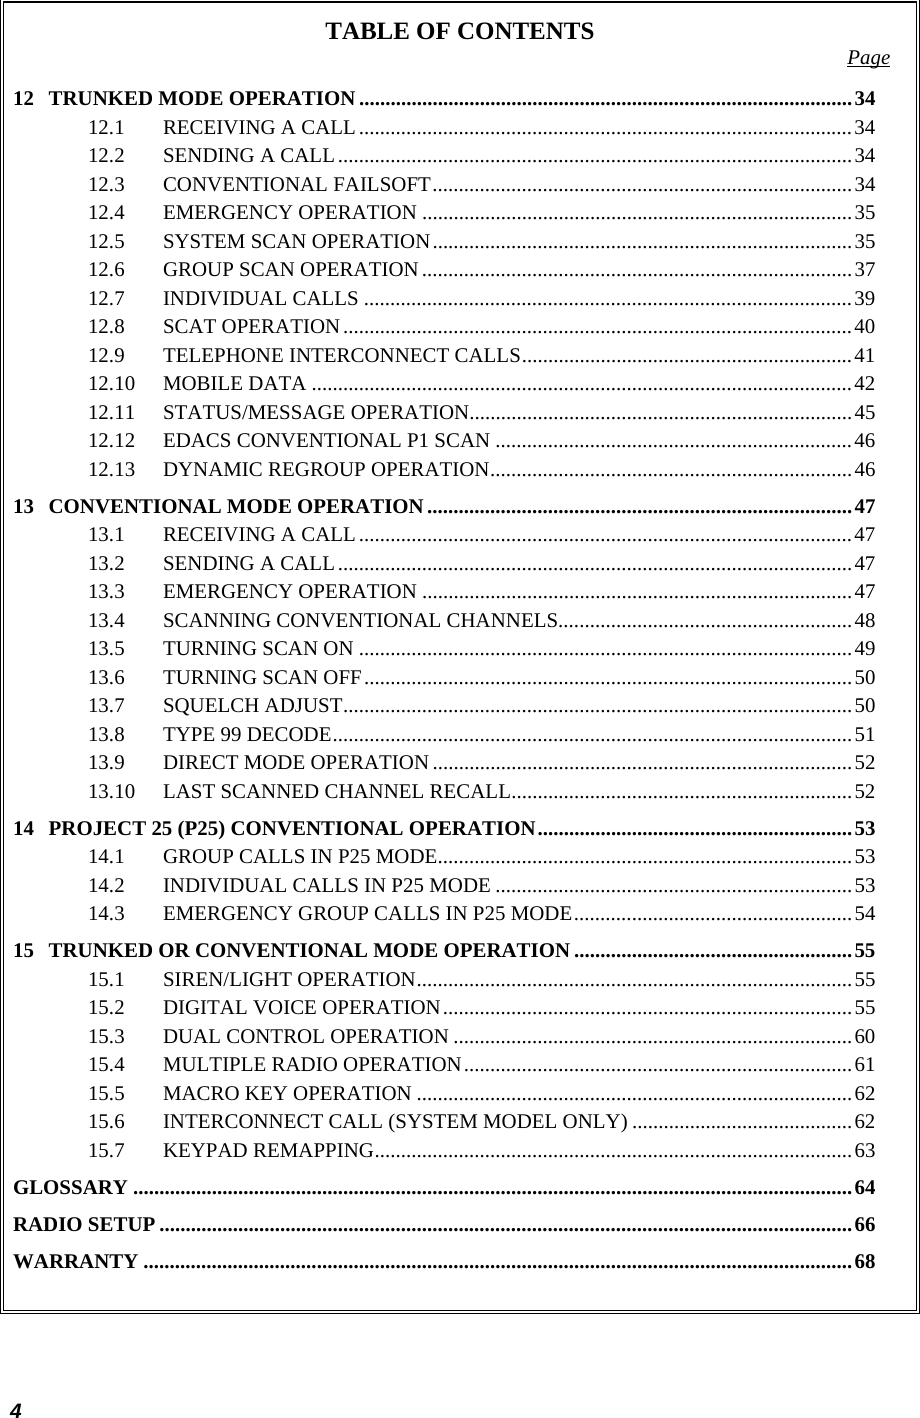  4 TABLE OF CONTENTS  Page 12 TRUNKED MODE OPERATION ..............................................................................................34 12.1 RECEIVING A CALL..............................................................................................34 12.2 SENDING A CALL..................................................................................................34 12.3 CONVENTIONAL FAILSOFT................................................................................34 12.4 EMERGENCY OPERATION ..................................................................................35 12.5 SYSTEM SCAN OPERATION................................................................................35 12.6 GROUP SCAN OPERATION ..................................................................................37 12.7 INDIVIDUAL CALLS .............................................................................................39 12.8 SCAT OPERATION.................................................................................................40 12.9 TELEPHONE INTERCONNECT CALLS...............................................................41 12.10 MOBILE DATA .......................................................................................................42 12.11 STATUS/MESSAGE OPERATION.........................................................................45 12.12 EDACS CONVENTIONAL P1 SCAN ....................................................................46 12.13 DYNAMIC REGROUP OPERATION.....................................................................46 13 CONVENTIONAL MODE OPERATION.................................................................................47 13.1 RECEIVING A CALL..............................................................................................47 13.2 SENDING A CALL..................................................................................................47 13.3 EMERGENCY OPERATION ..................................................................................47 13.4 SCANNING CONVENTIONAL CHANNELS........................................................48 13.5 TURNING SCAN ON ..............................................................................................49 13.6 TURNING SCAN OFF.............................................................................................50 13.7 SQUELCH ADJUST.................................................................................................50 13.8 TYPE 99 DECODE...................................................................................................51 13.9 DIRECT MODE OPERATION ................................................................................52 13.10 LAST SCANNED CHANNEL RECALL.................................................................52 14 PROJECT 25 (P25) CONVENTIONAL OPERATION............................................................53 14.1 GROUP CALLS IN P25 MODE...............................................................................53 14.2 INDIVIDUAL CALLS IN P25 MODE ....................................................................53 14.3 EMERGENCY GROUP CALLS IN P25 MODE.....................................................54 15 TRUNKED OR CONVENTIONAL MODE OPERATION .....................................................55 15.1 SIREN/LIGHT OPERATION...................................................................................55 15.2 DIGITAL VOICE OPERATION..............................................................................55 15.3 DUAL CONTROL OPERATION ............................................................................60 15.4 MULTIPLE RADIO OPERATION..........................................................................61 15.5 MACRO KEY OPERATION ...................................................................................62 15.6 INTERCONNECT CALL (SYSTEM MODEL ONLY) ..........................................62 15.7 KEYPAD REMAPPING...........................................................................................63 GLOSSARY .........................................................................................................................................64 RADIO SETUP ....................................................................................................................................66 WARRANTY .......................................................................................................................................68  